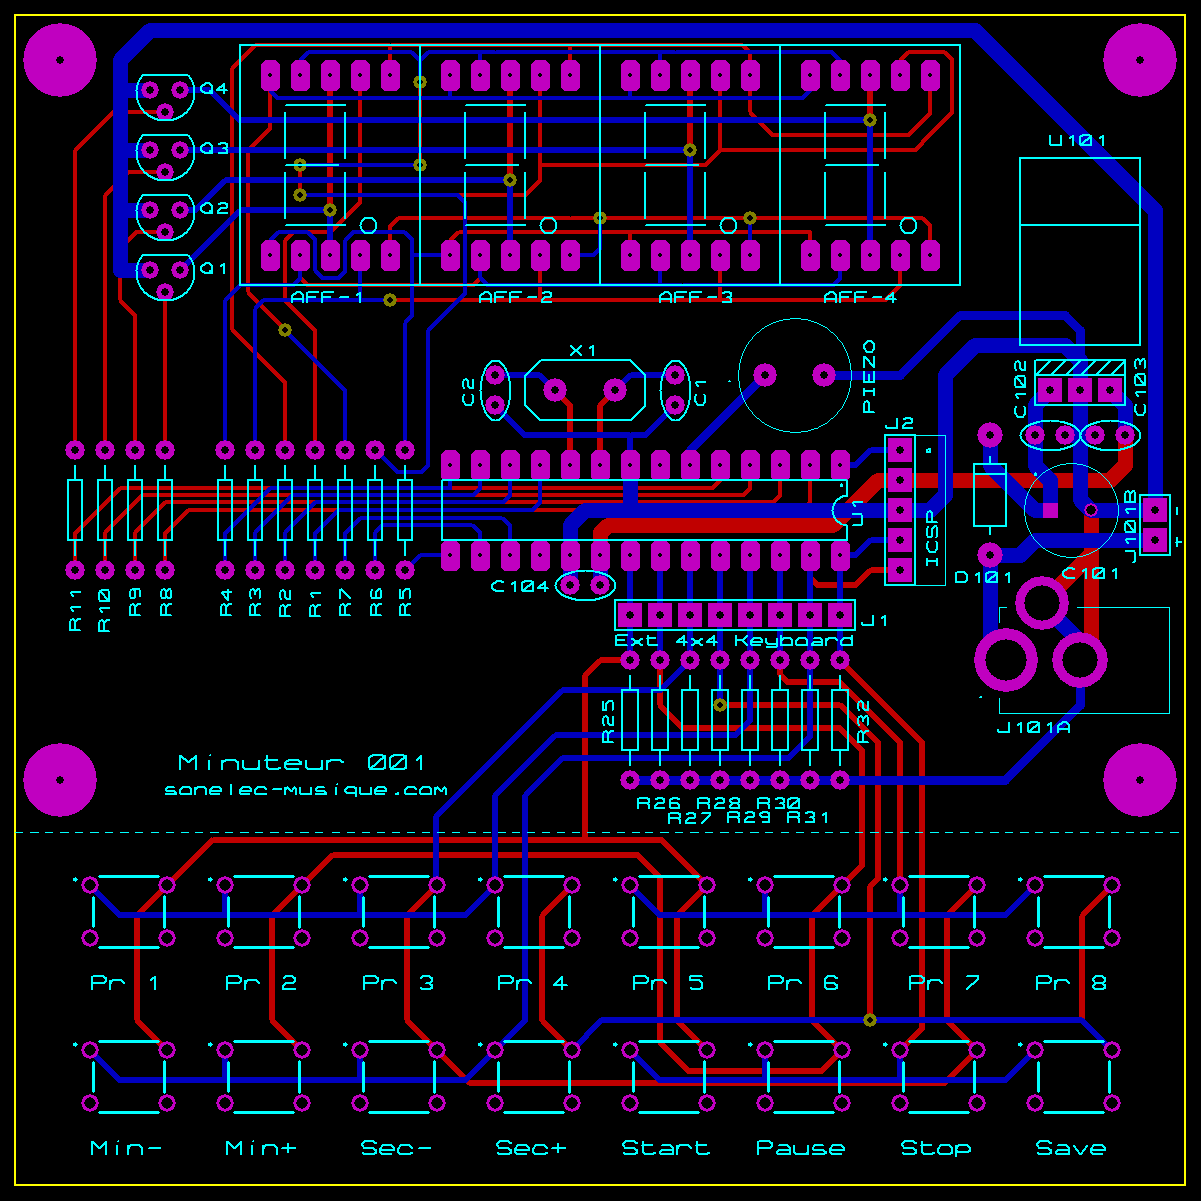 minuterie_001_pcb_components-top